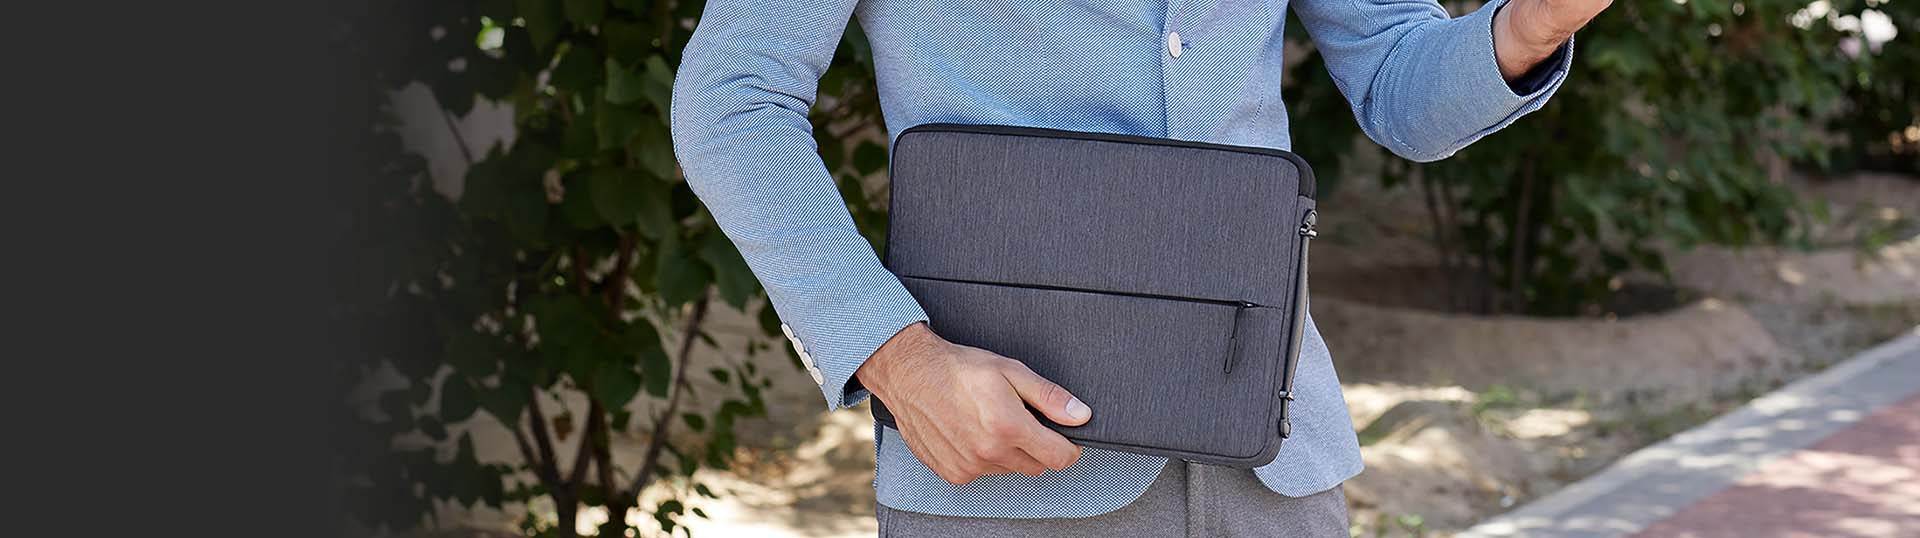 Guy in a light blue suit coat carries a dark gray Lenovo laptop sleeve outside.